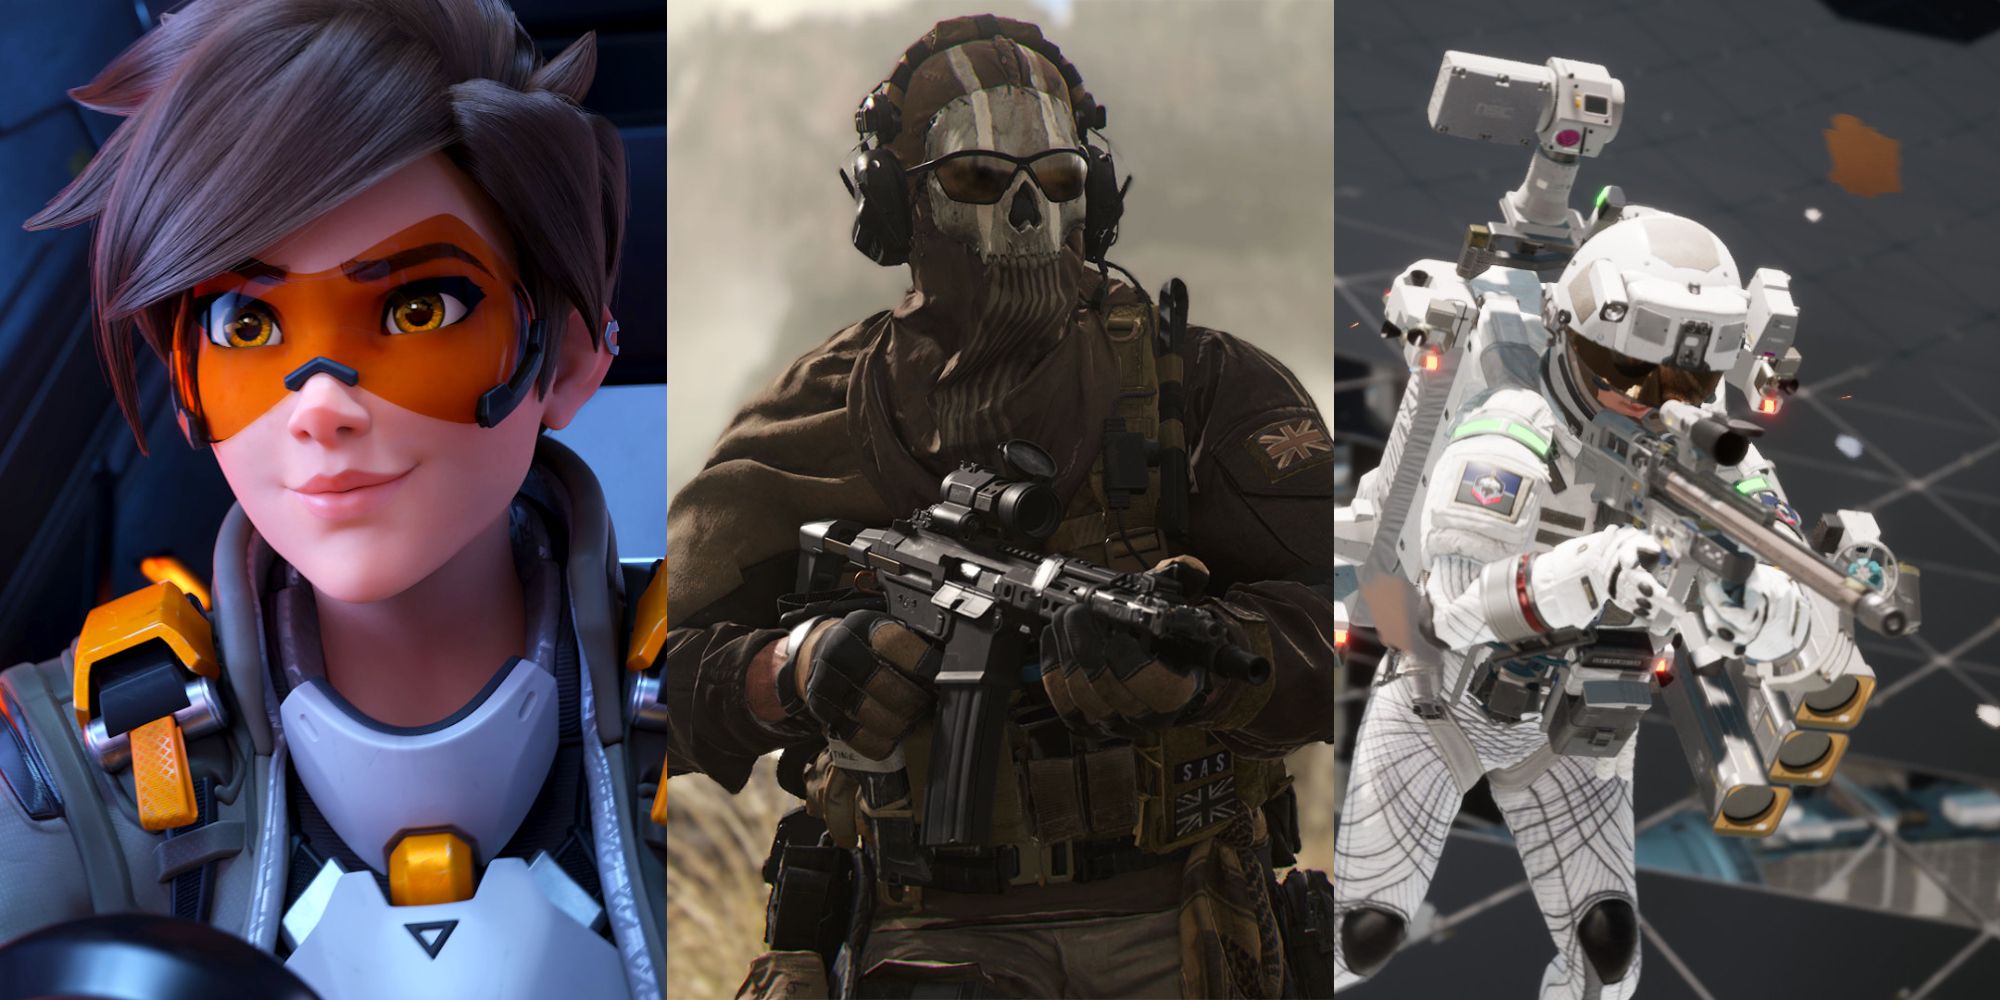 Modern Warfare 2, Overwatch 2, and Boundary are just three of the major FPS games expected to launch in 2022.